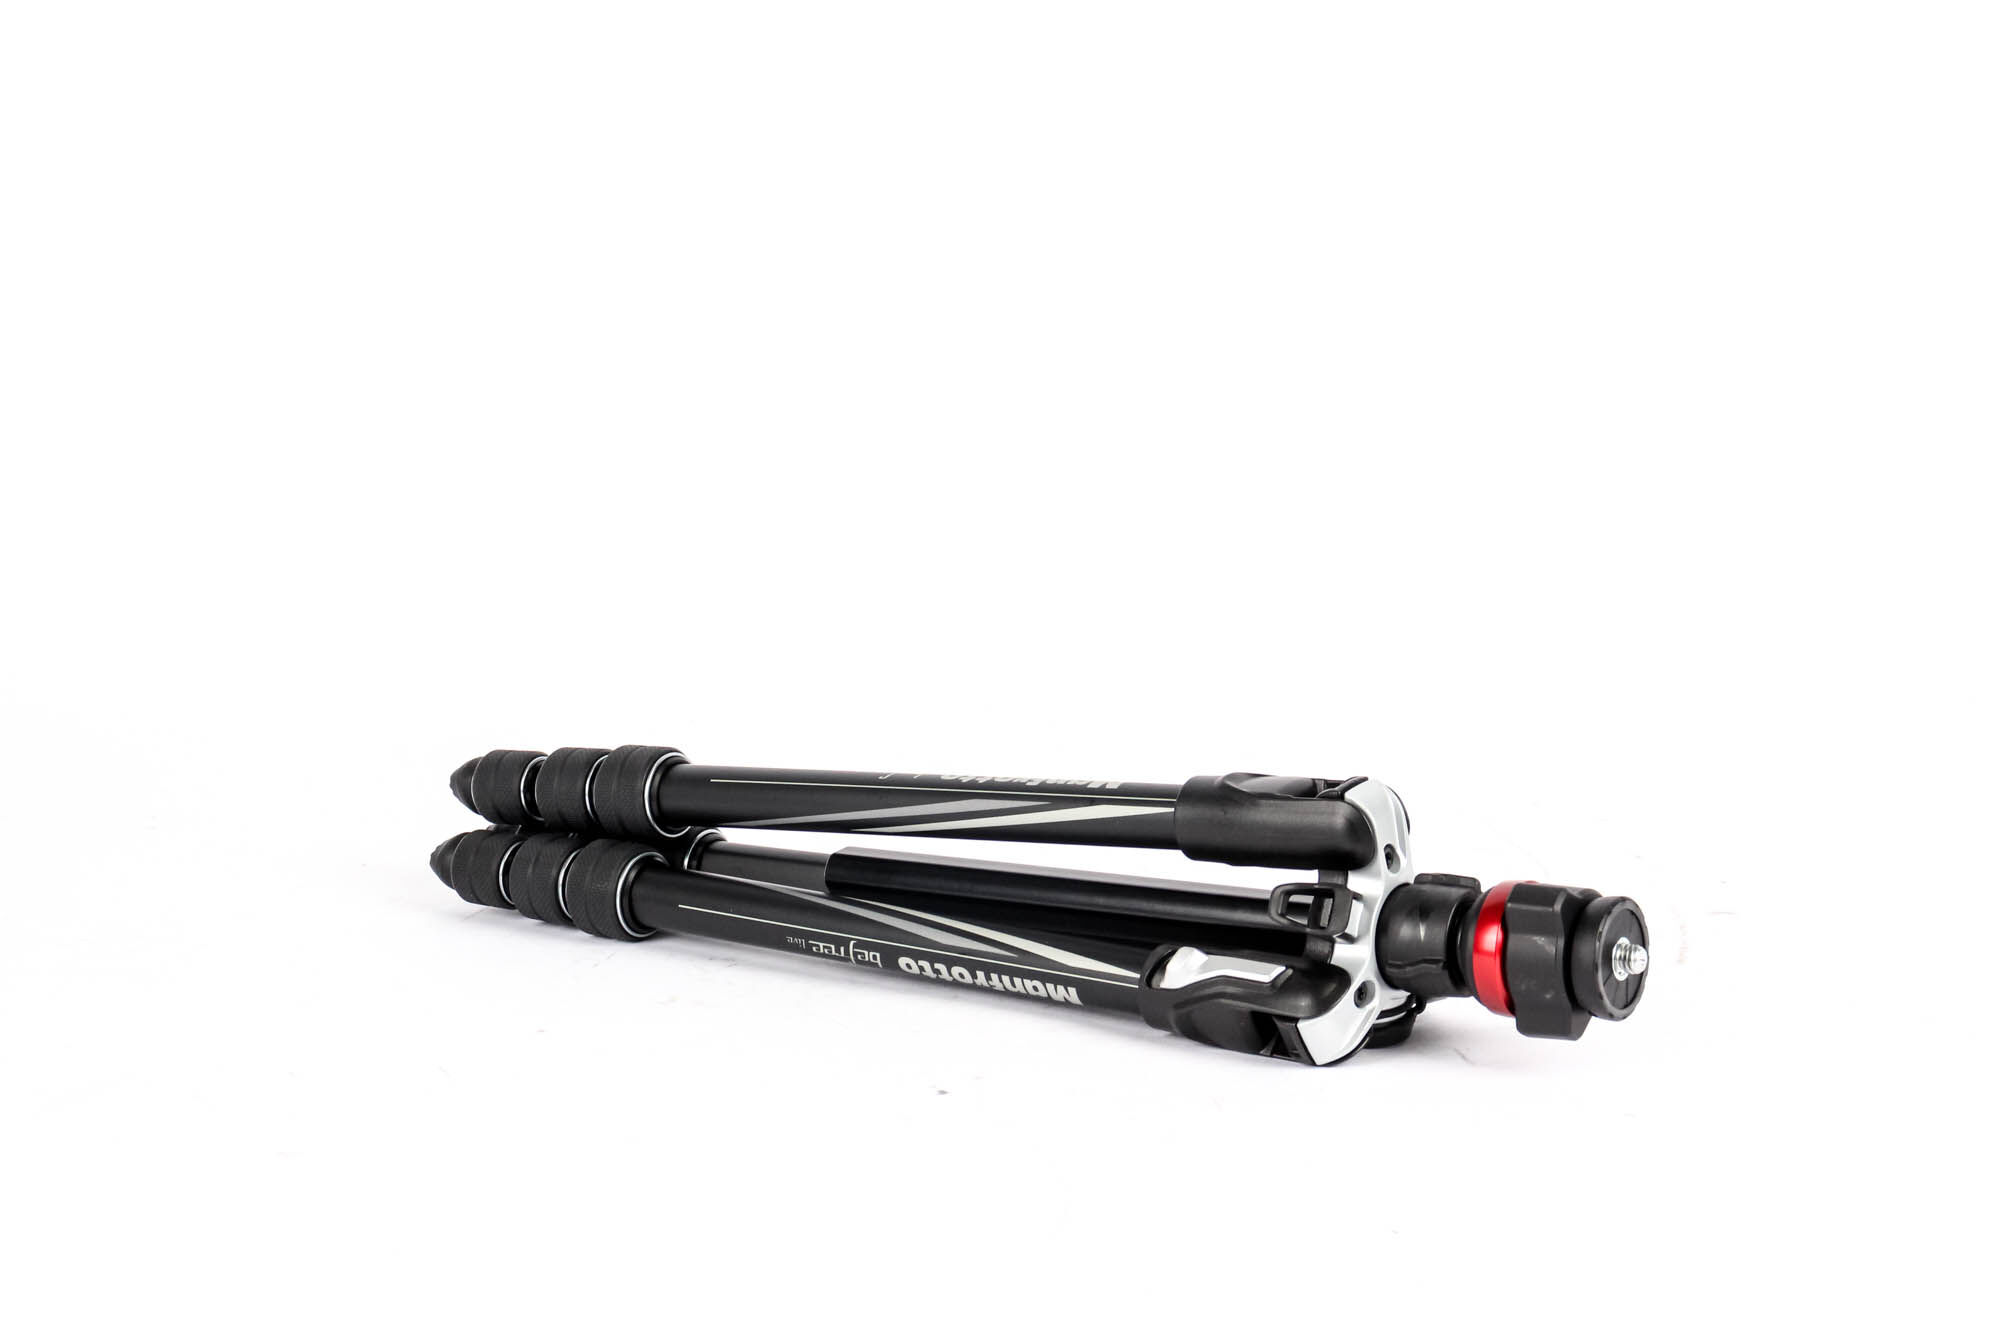 Manfrotto Befree Live Video Tripod (Condition: Like New)